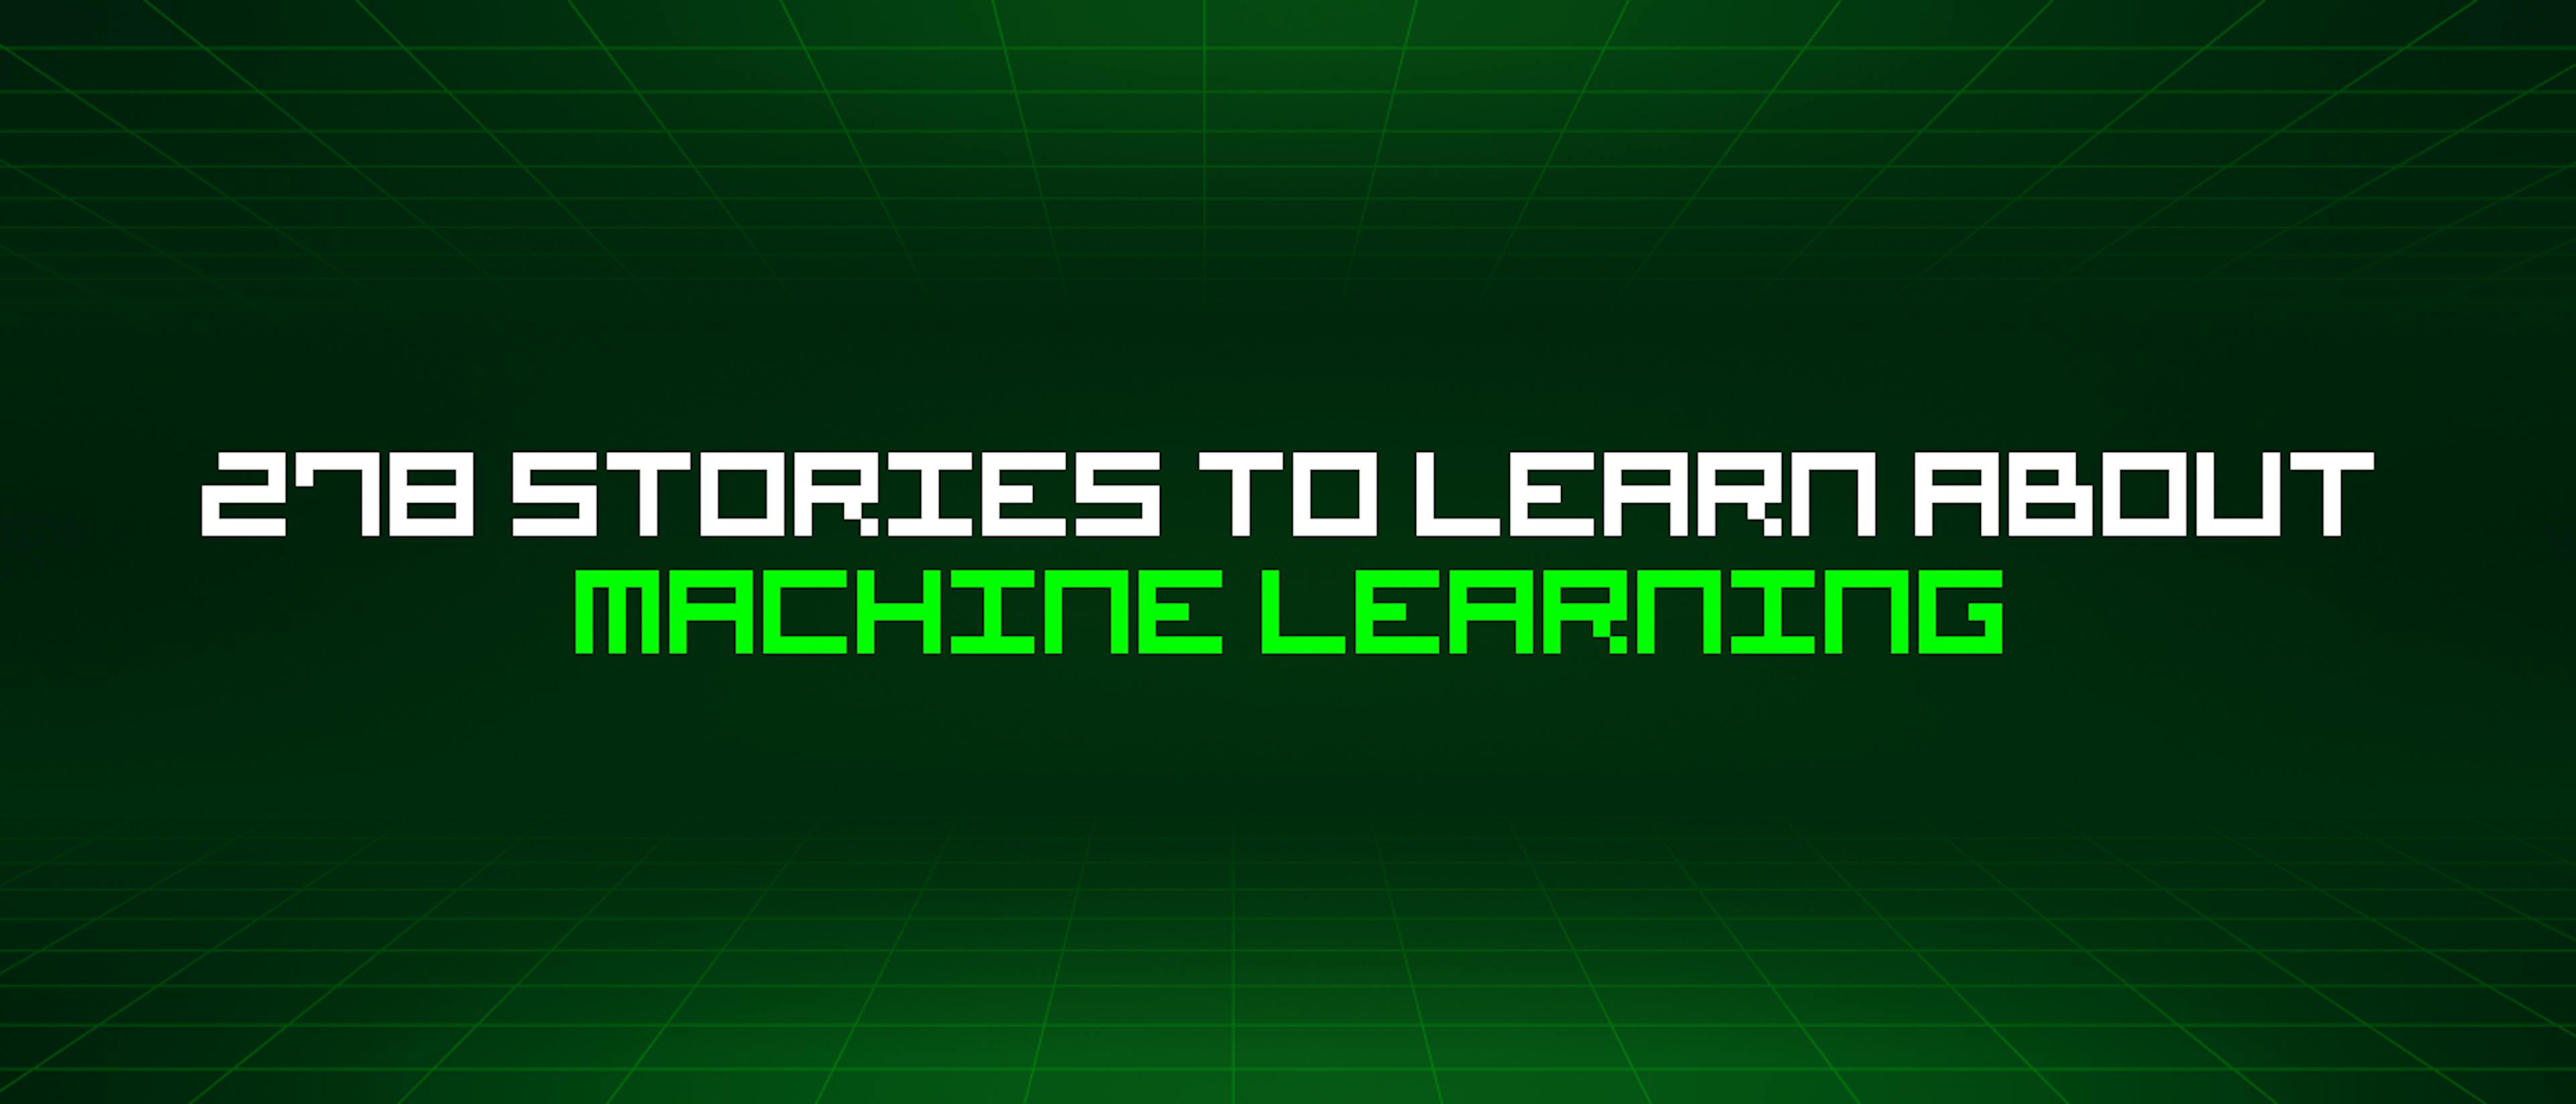 featured image - 278 Stories To Learn About Machine Learning